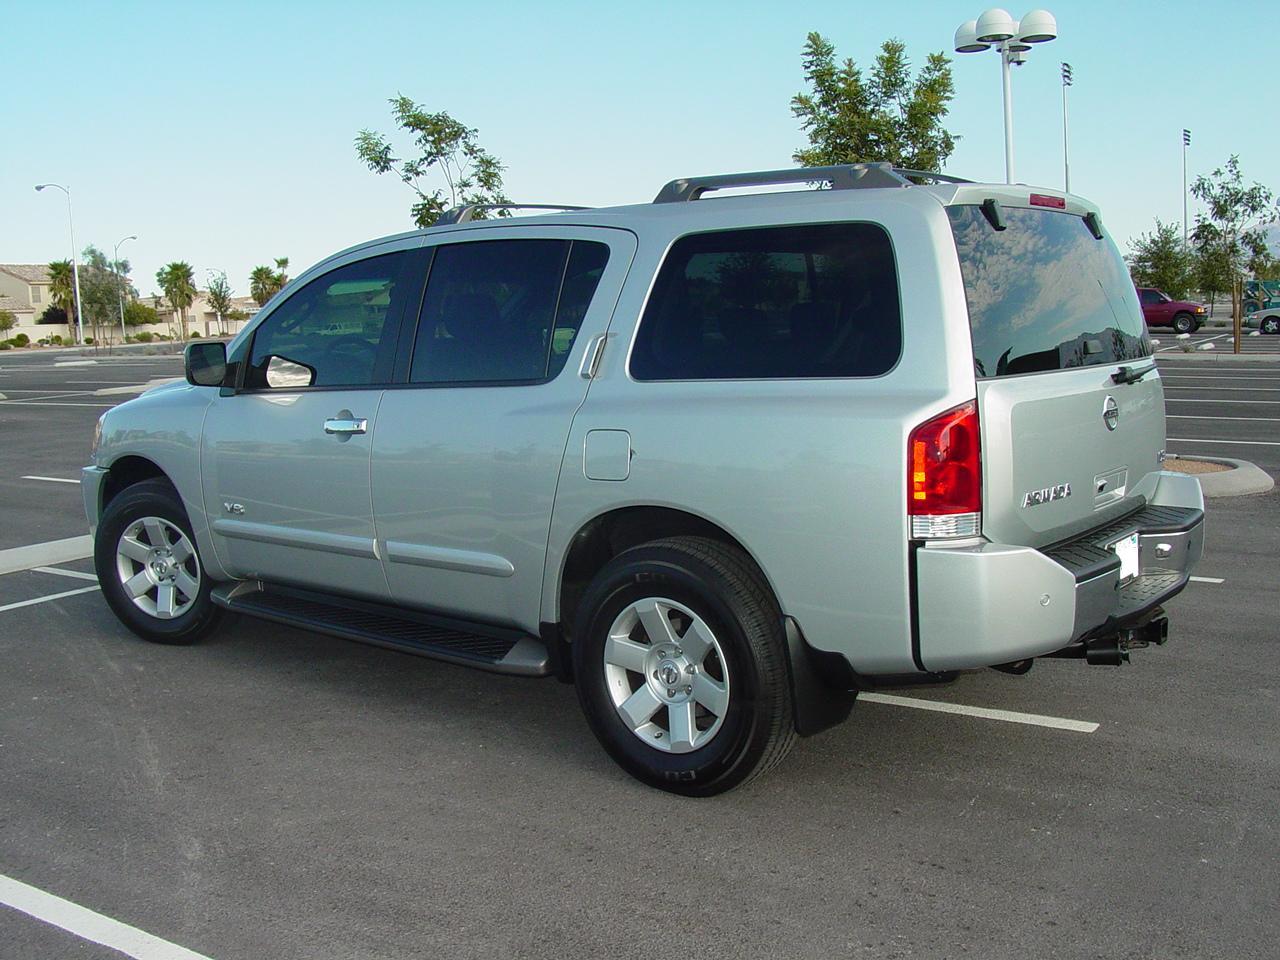 Nissan armada picture gallery #7